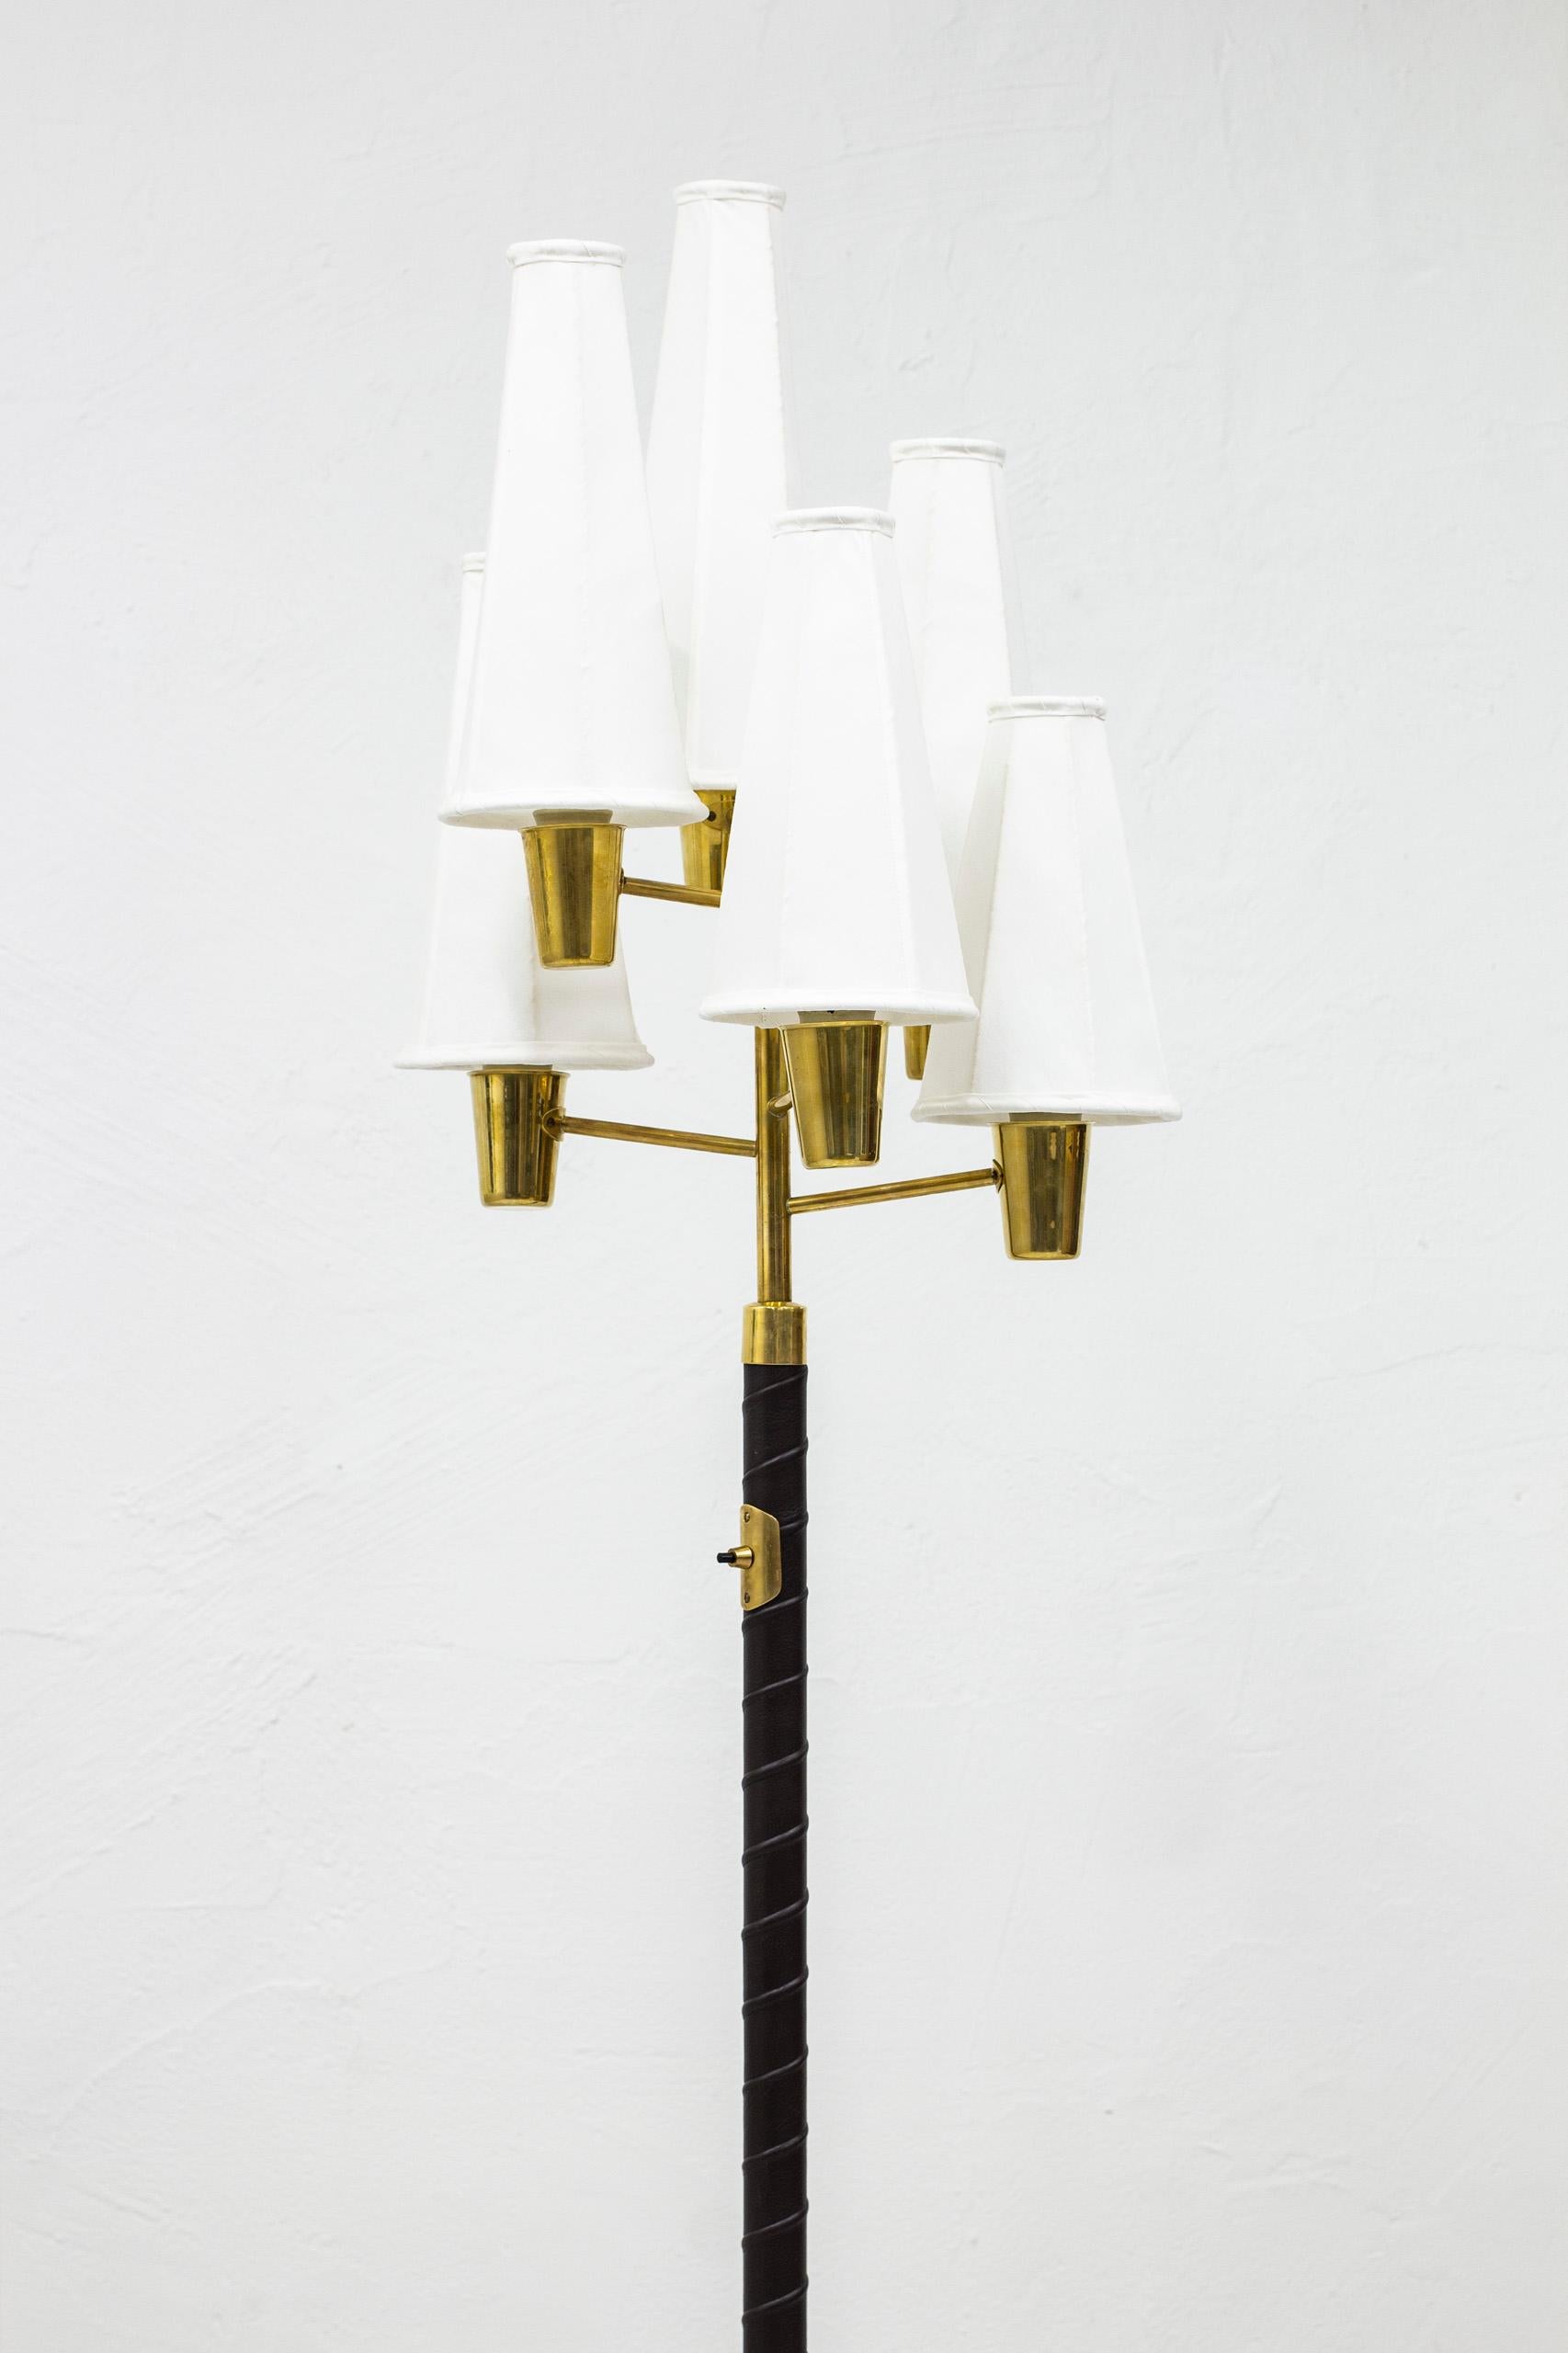 Very rare Swedish modern floor lamp designed by Hans Bergström. Produced by his company Ateljé Lyktan in Sweden during the 1940s. Made from brass and aubergine/ almost black leather. Six arms with asymmetrical shaped/sized chintz lamp shades. Light